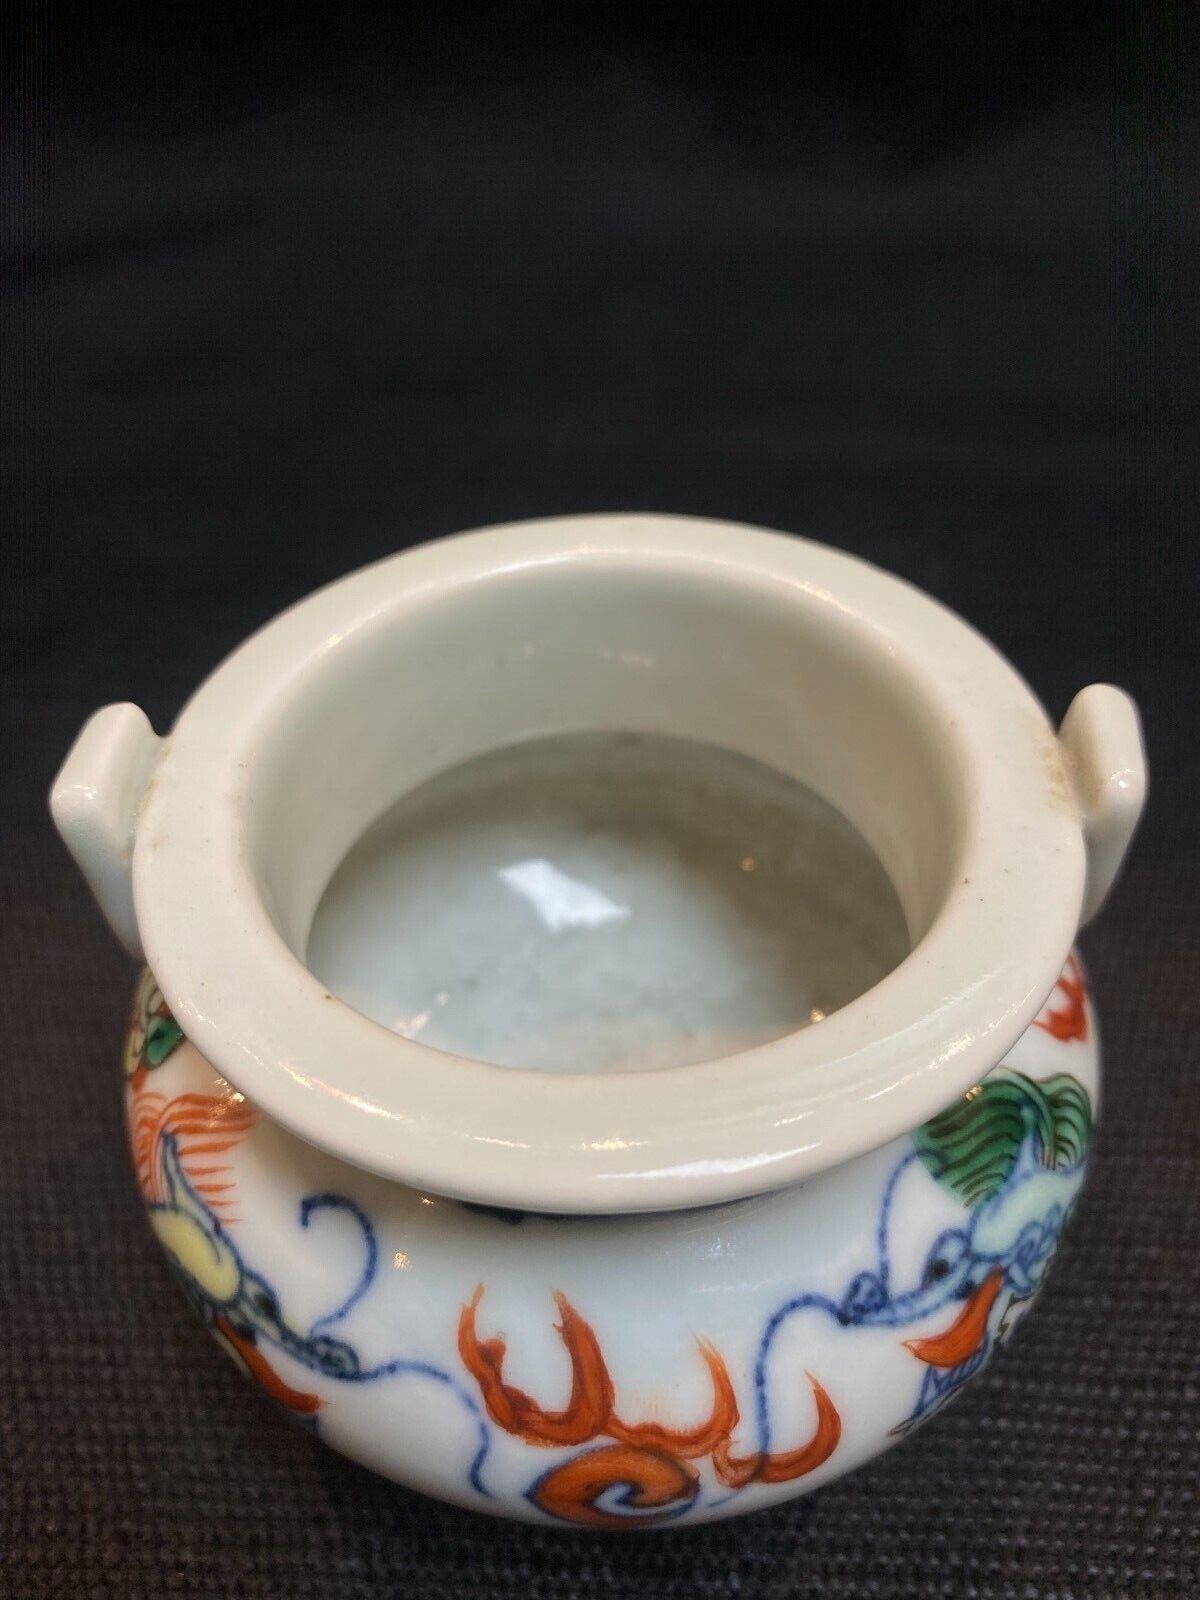 Republic of China,A small famille verte dragon pattern incense burner. ??,???????(??)
Condition: Shows normal sign of wear and use, No damage or crack. 
Material: porcelain
Approximate size:H: 7 cm, W: 7 cm, Diameter of the rim: 6.5 cm. Please